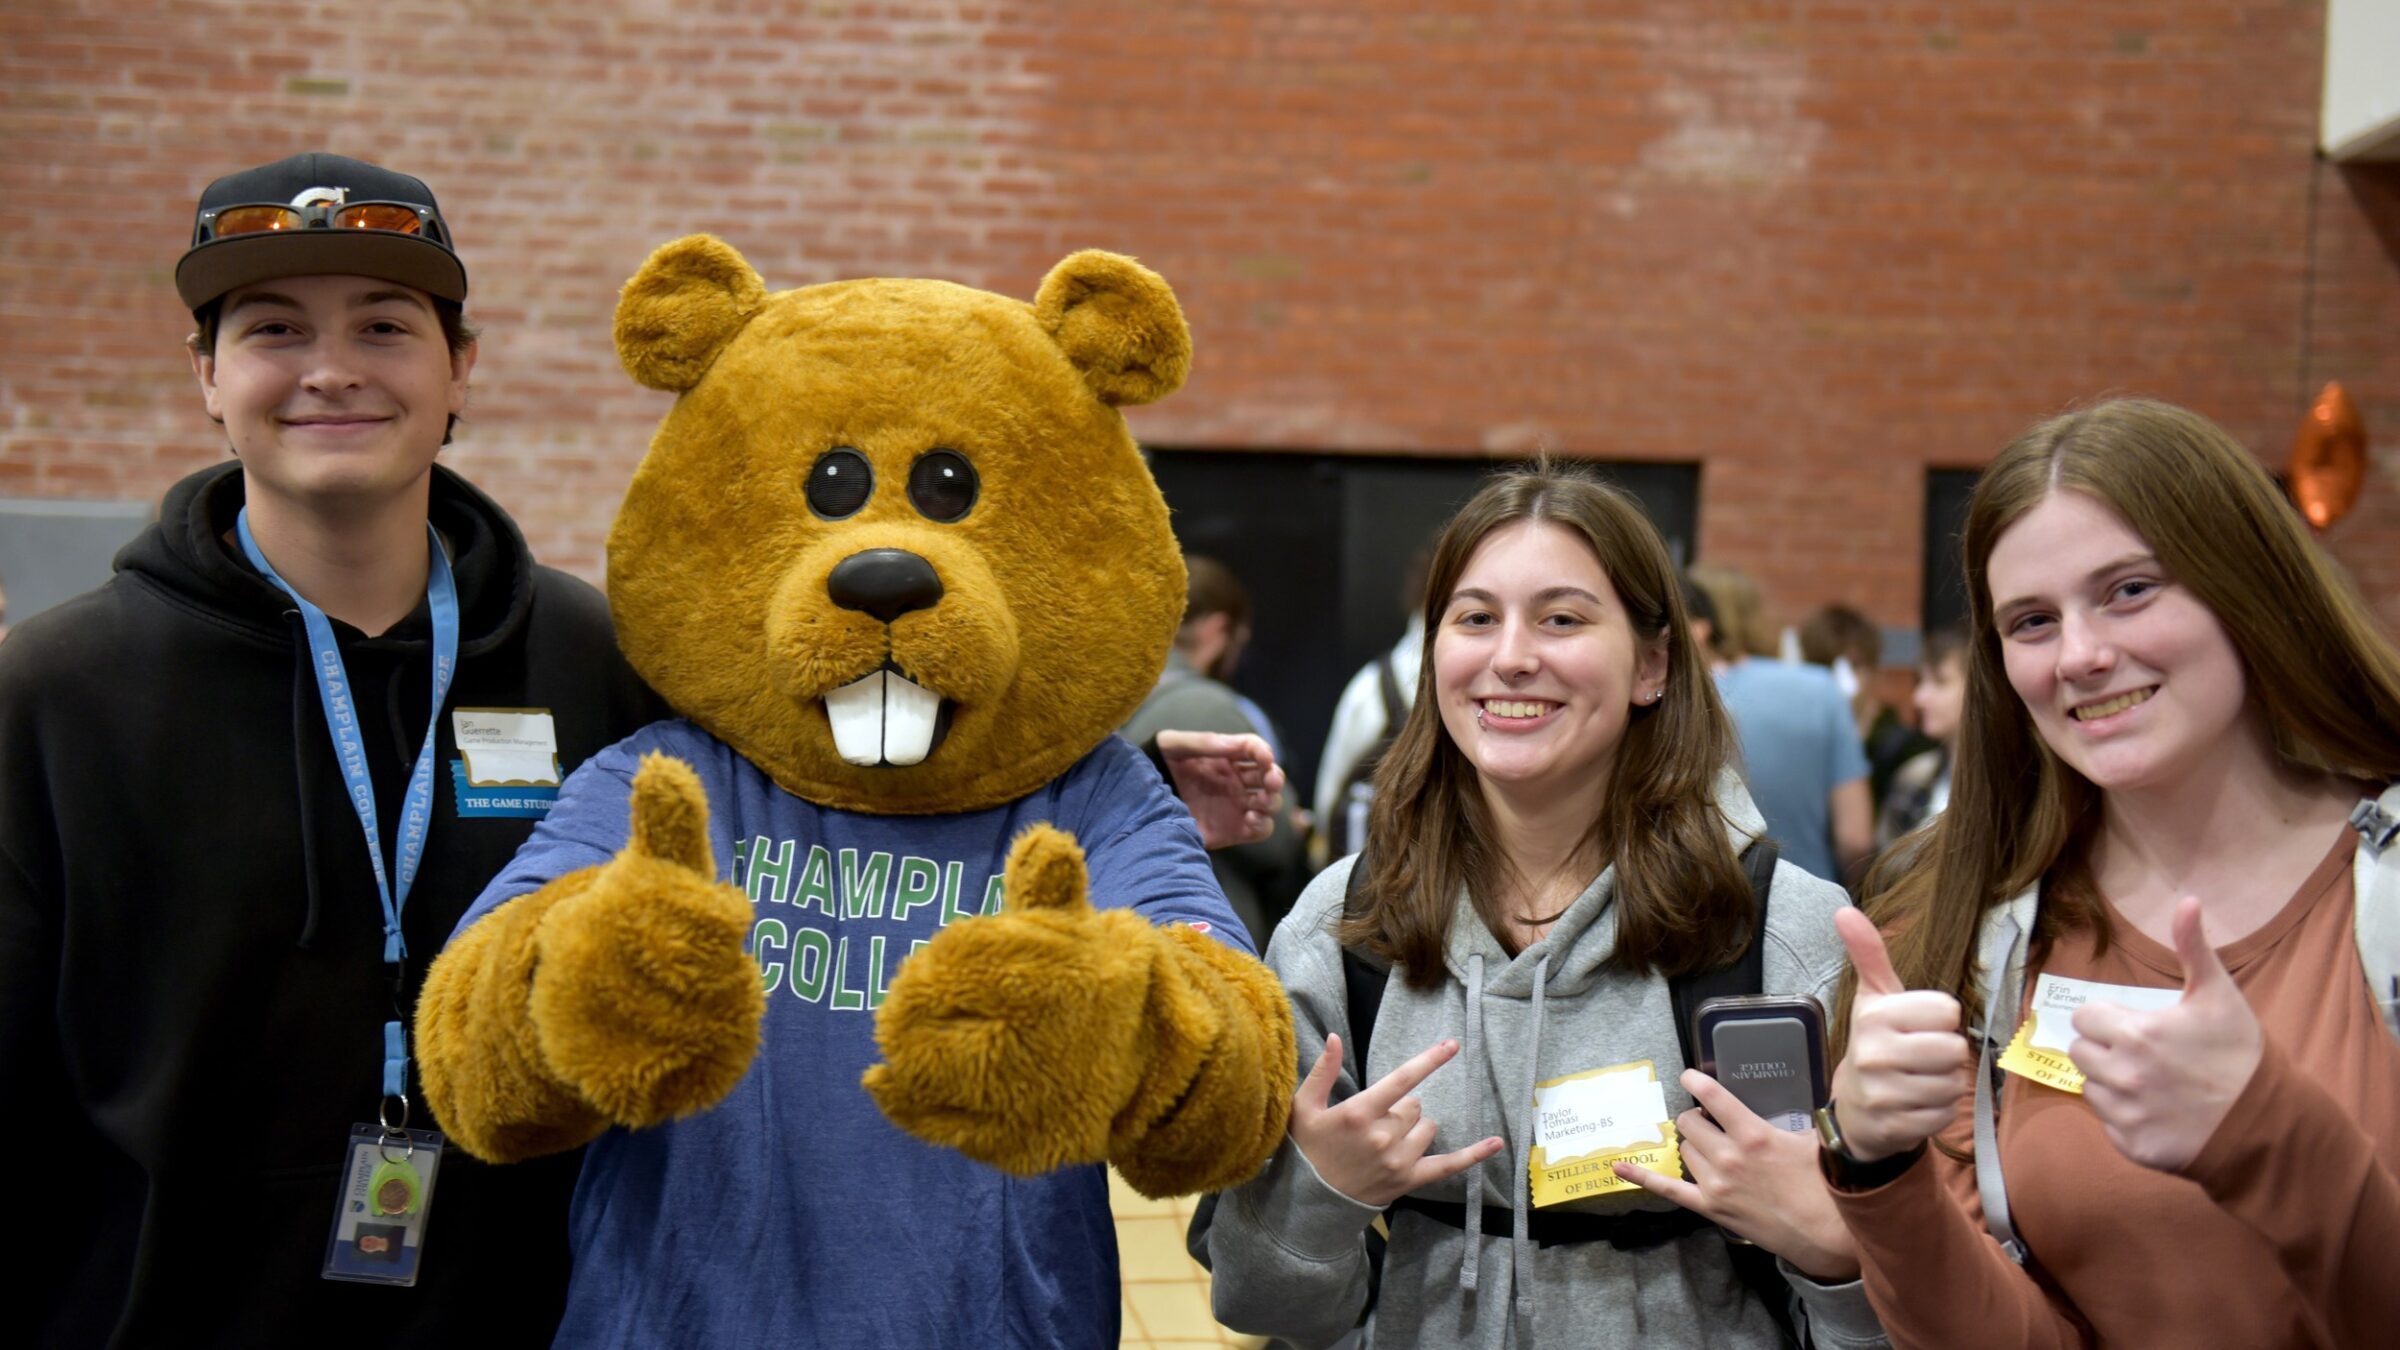 Three students and Chauncy the Beaver Mascot giving thumbs up signs at a career fair.